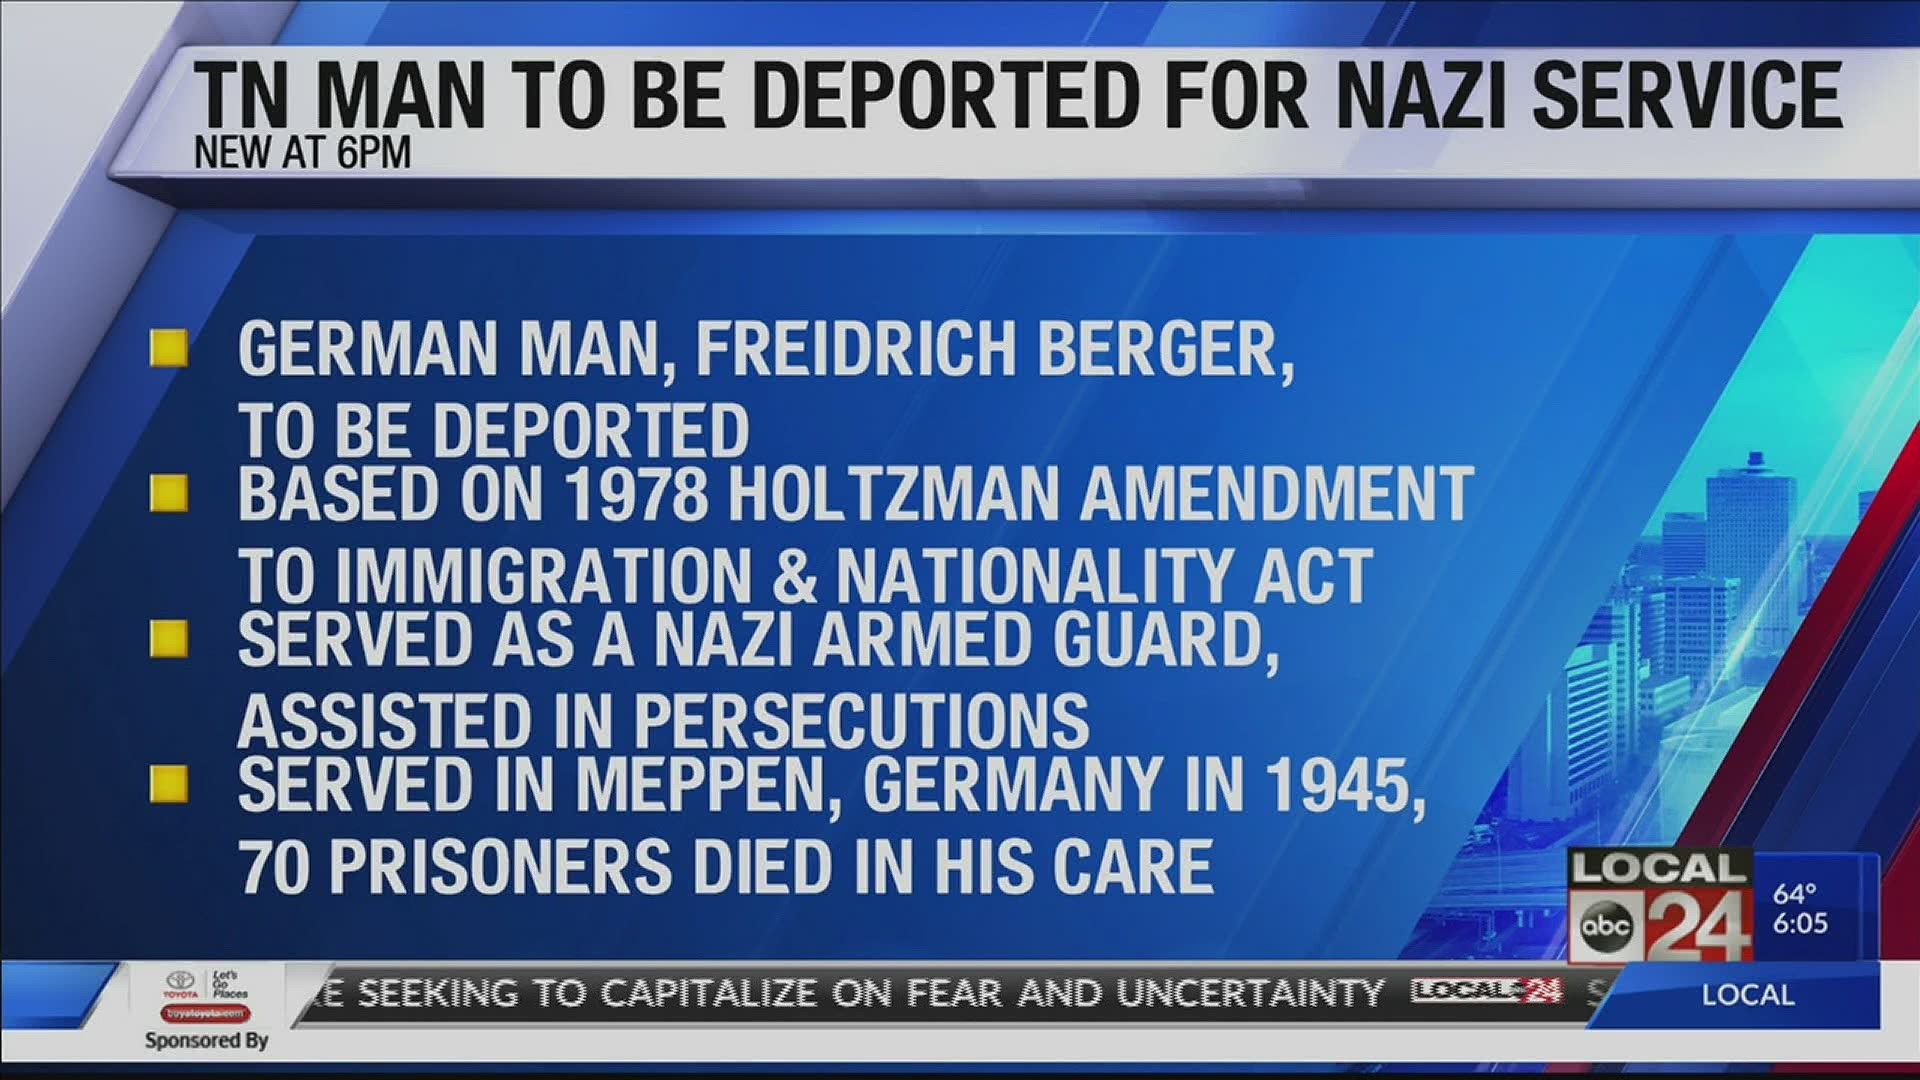 According to the Department of Justice, the Tennessee resident, Friedrich Karl Berger, worked as a concentration camp guard in 1945 in Nazi Germany.